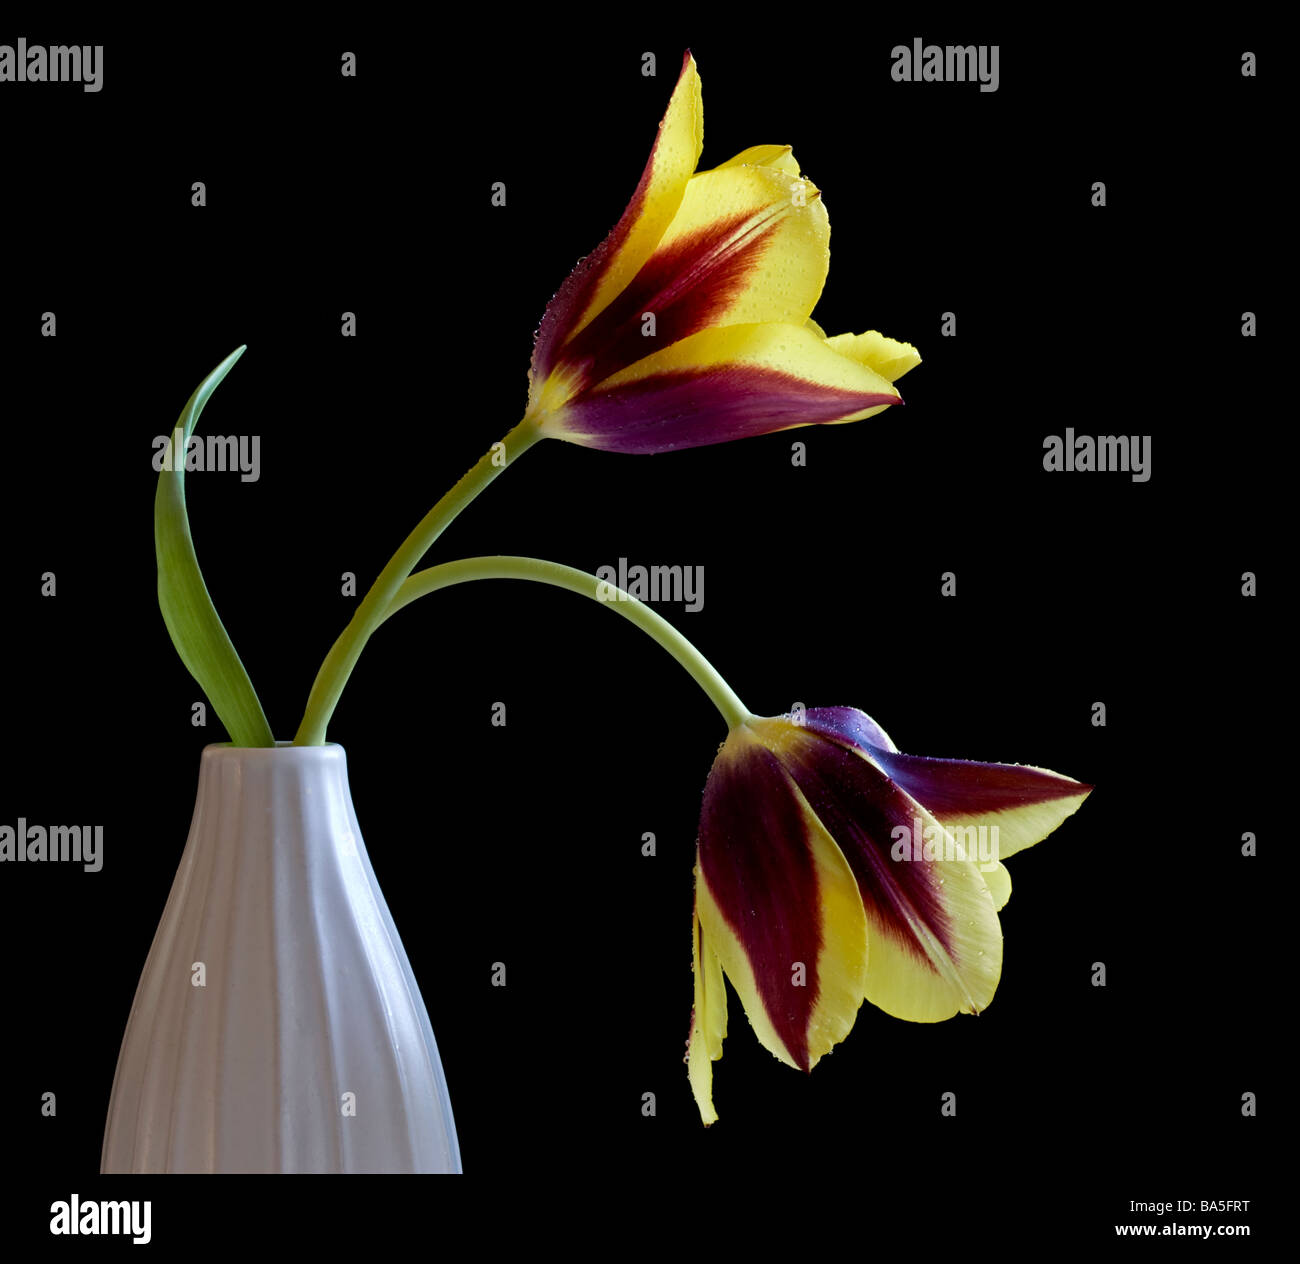 Two yellow and burgundy tulips in white vase against black background Stock Photo